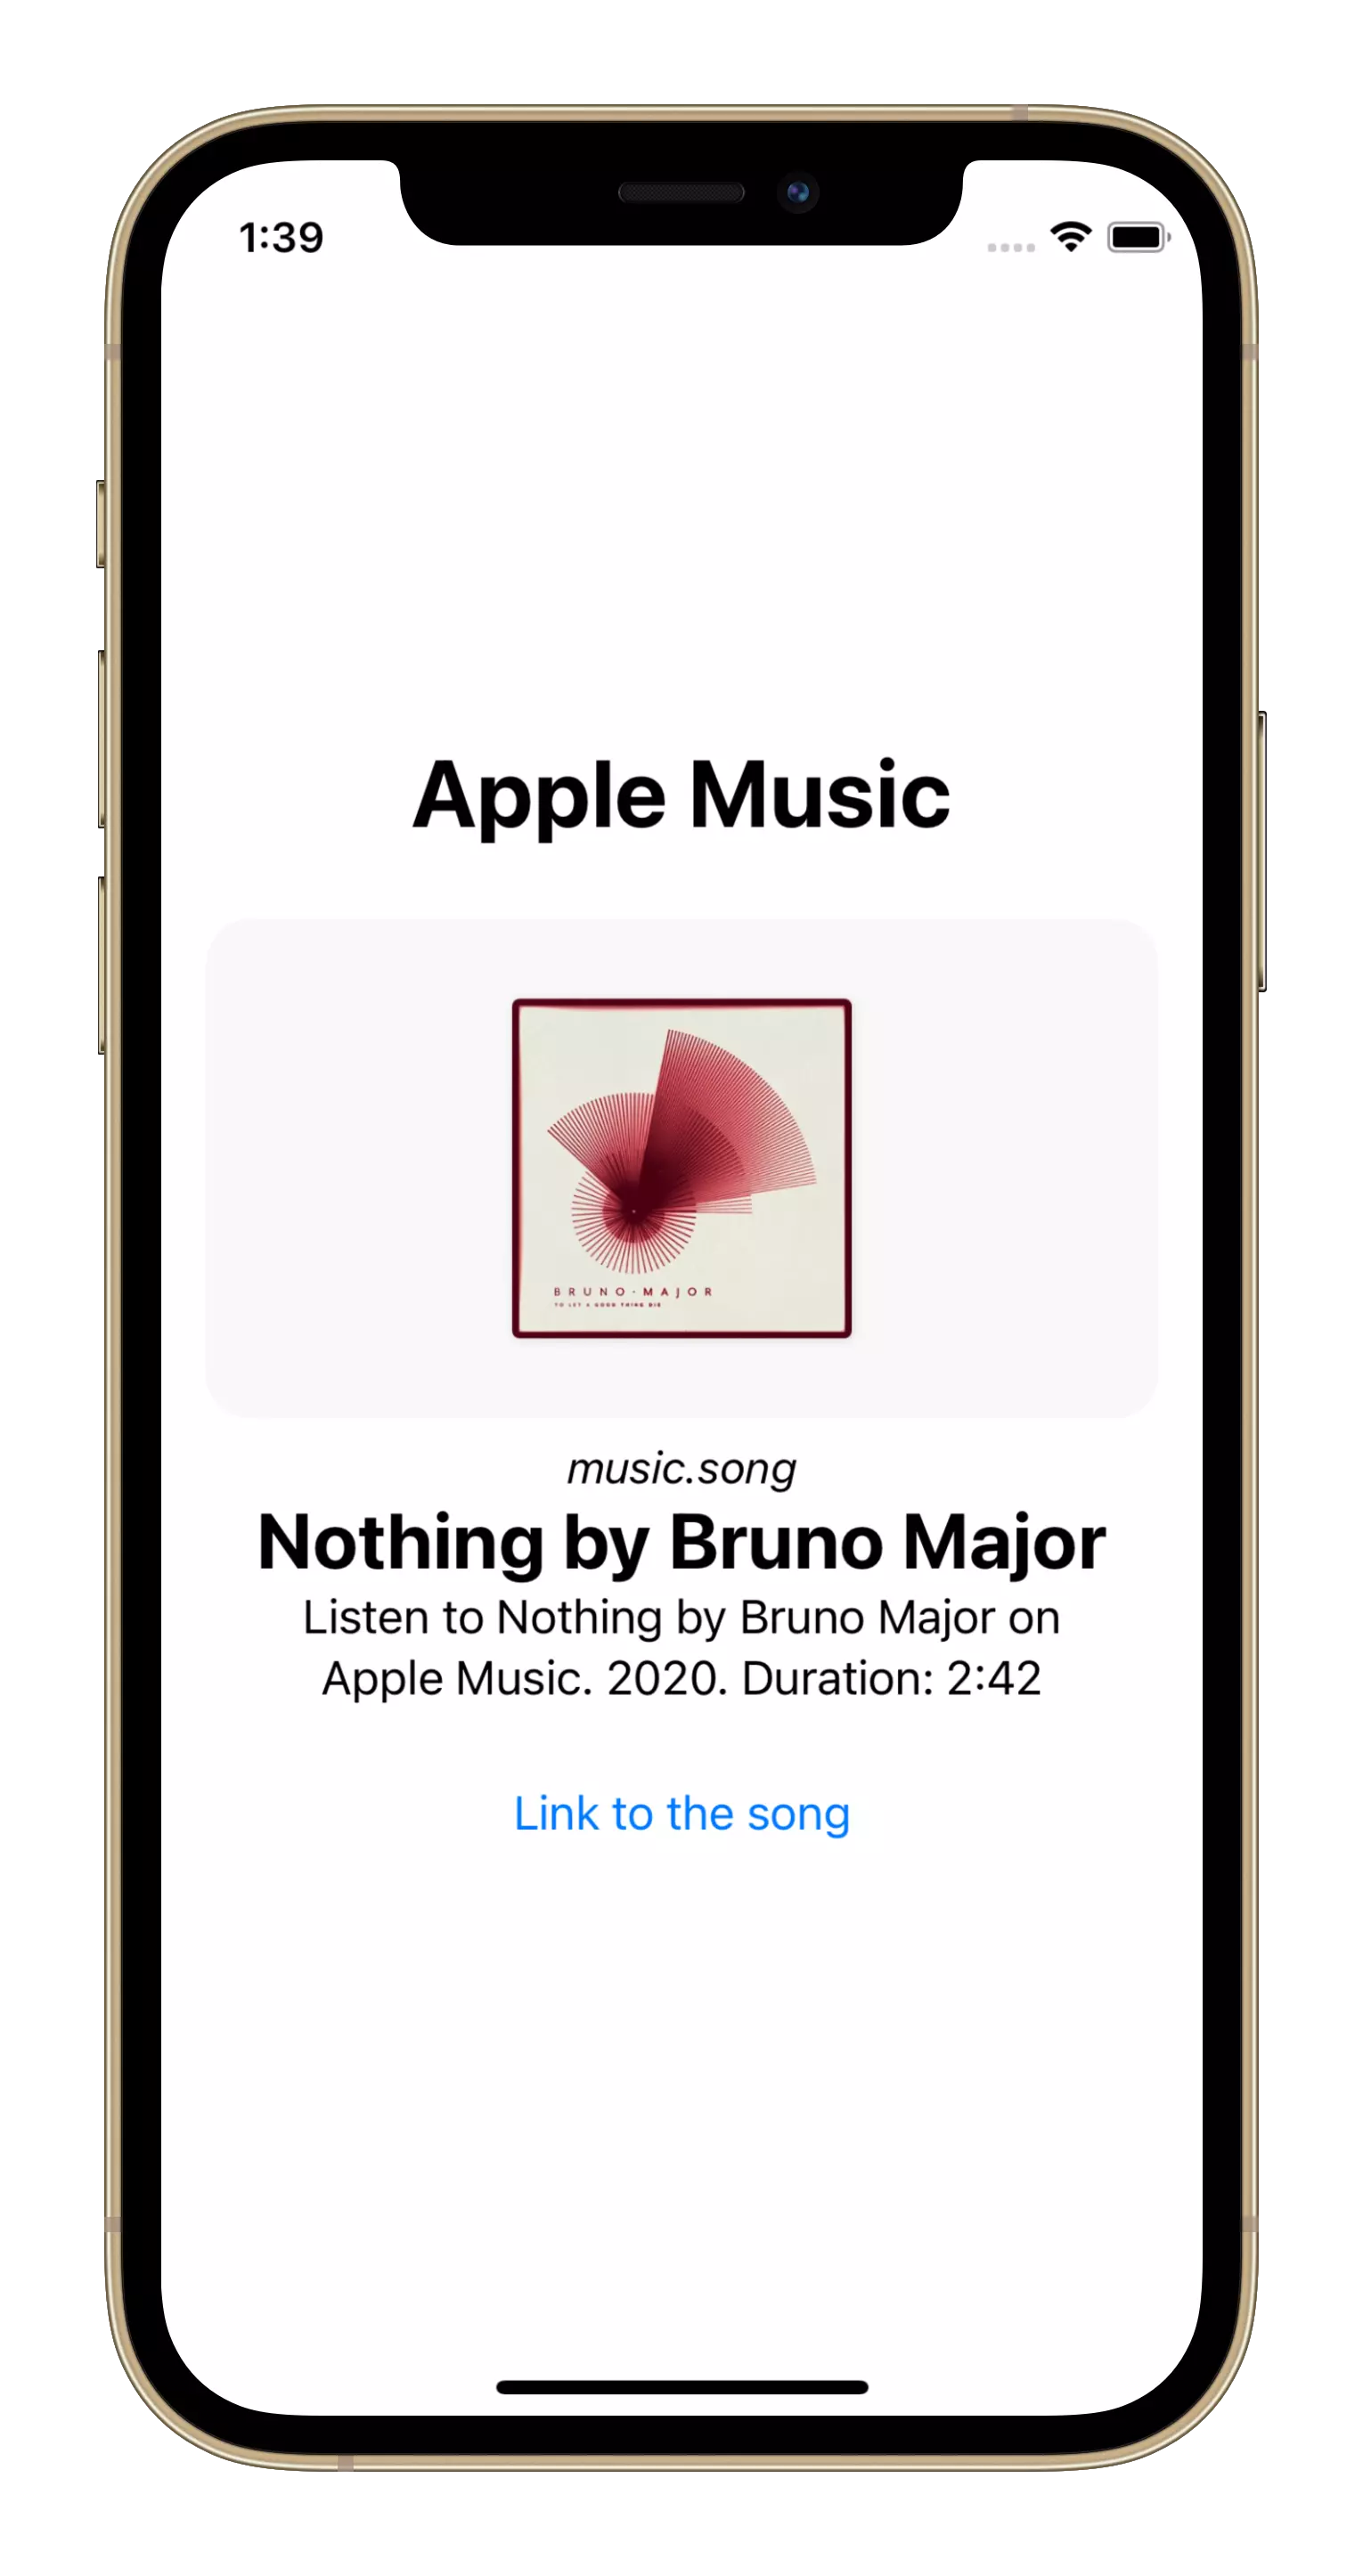 Nothing by Bruno Majors on Apple Music showing from Meta tags